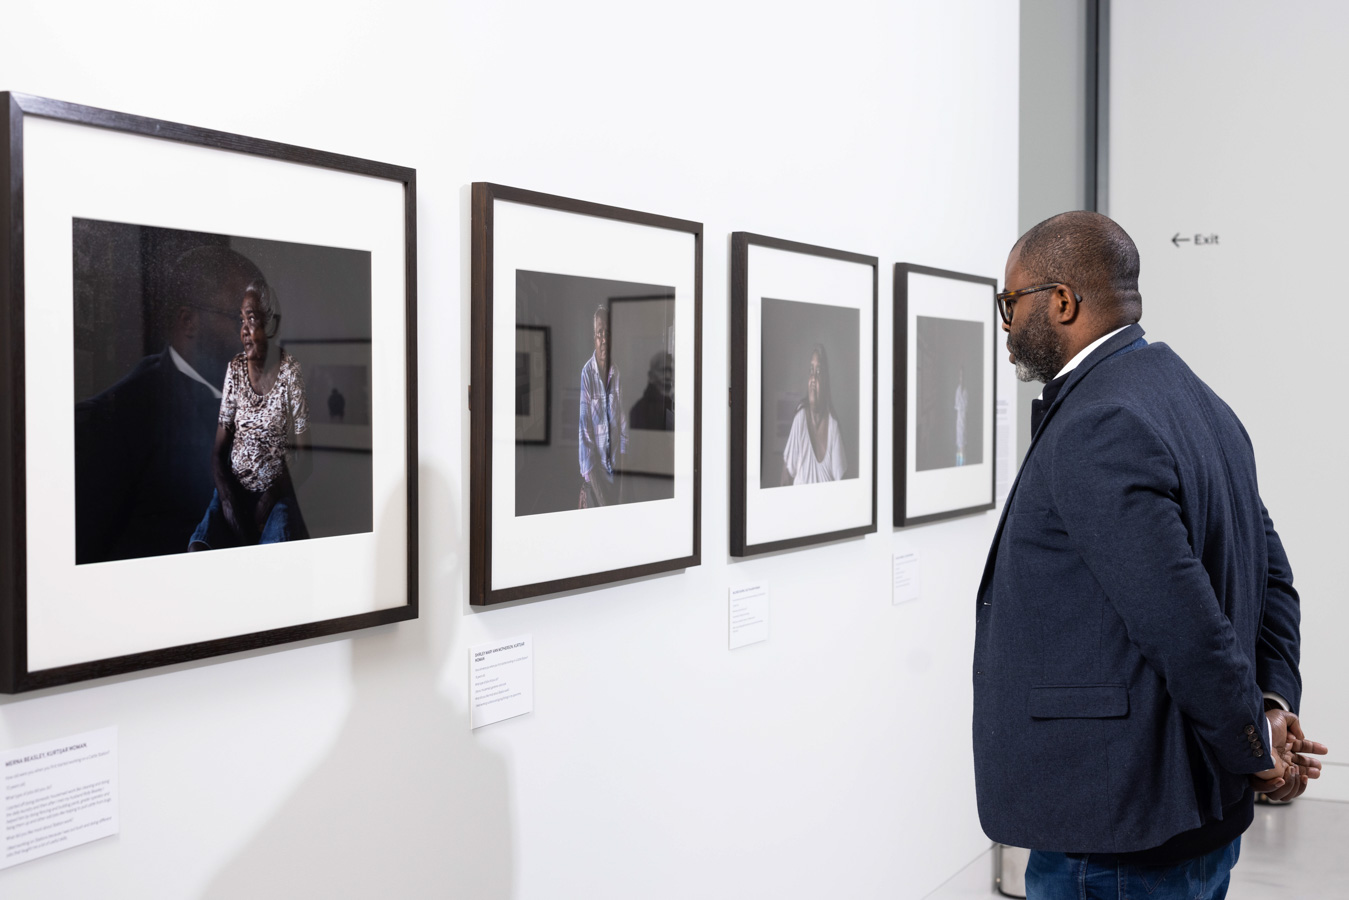 Exhibition install - winning works in the Taylor Wessing Photographic Portrait Prize by David Prichard. Documentation copyright David Parry. 